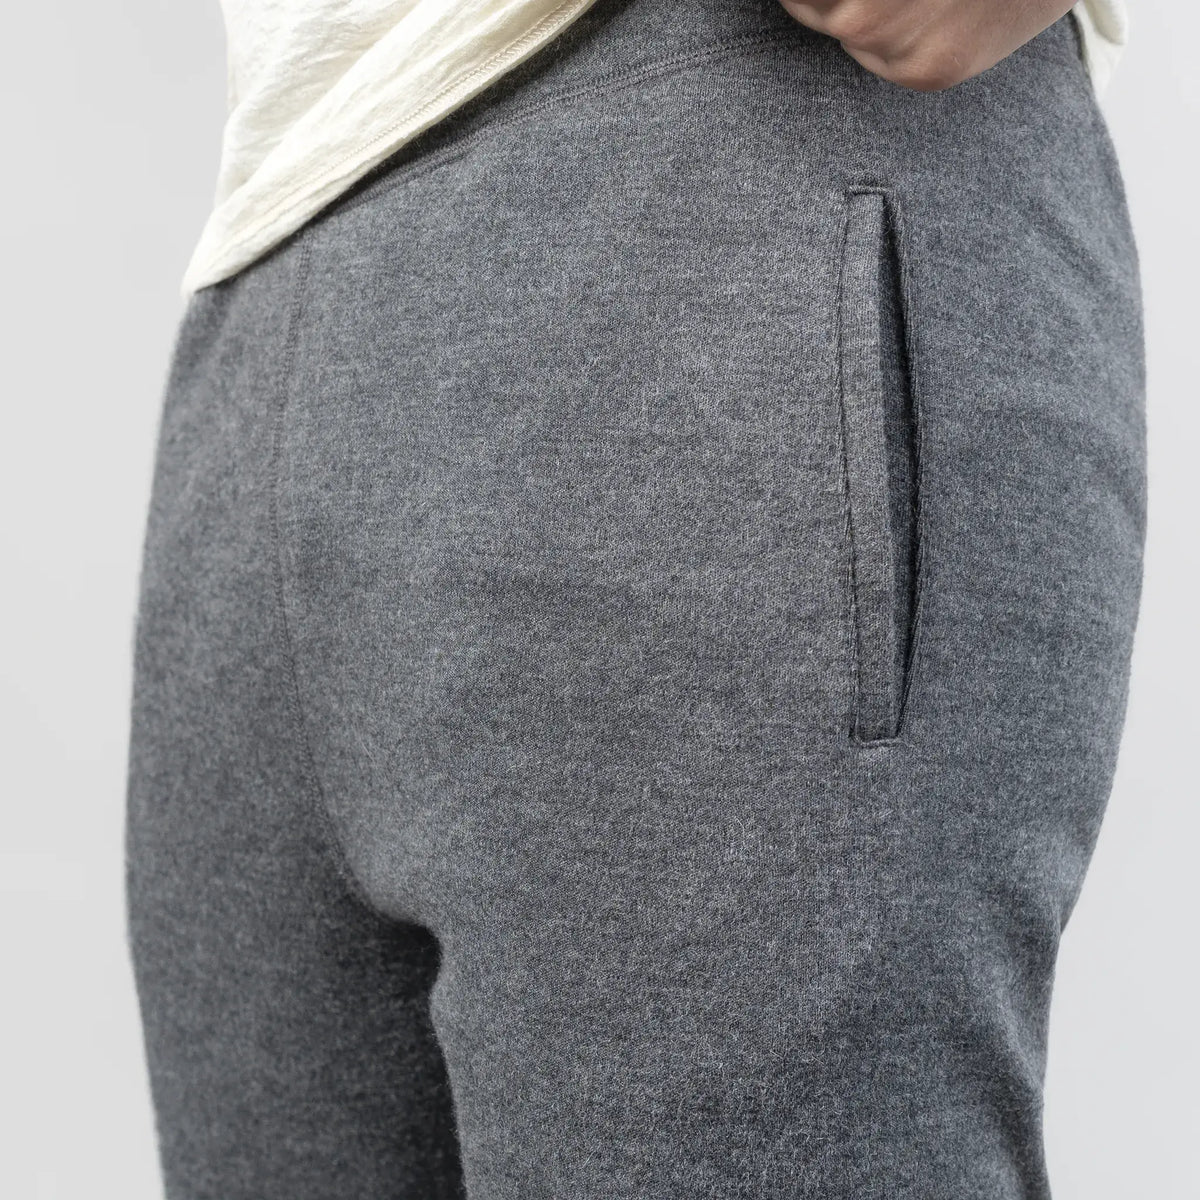 mens moisture wicking joggers lightweight color gray